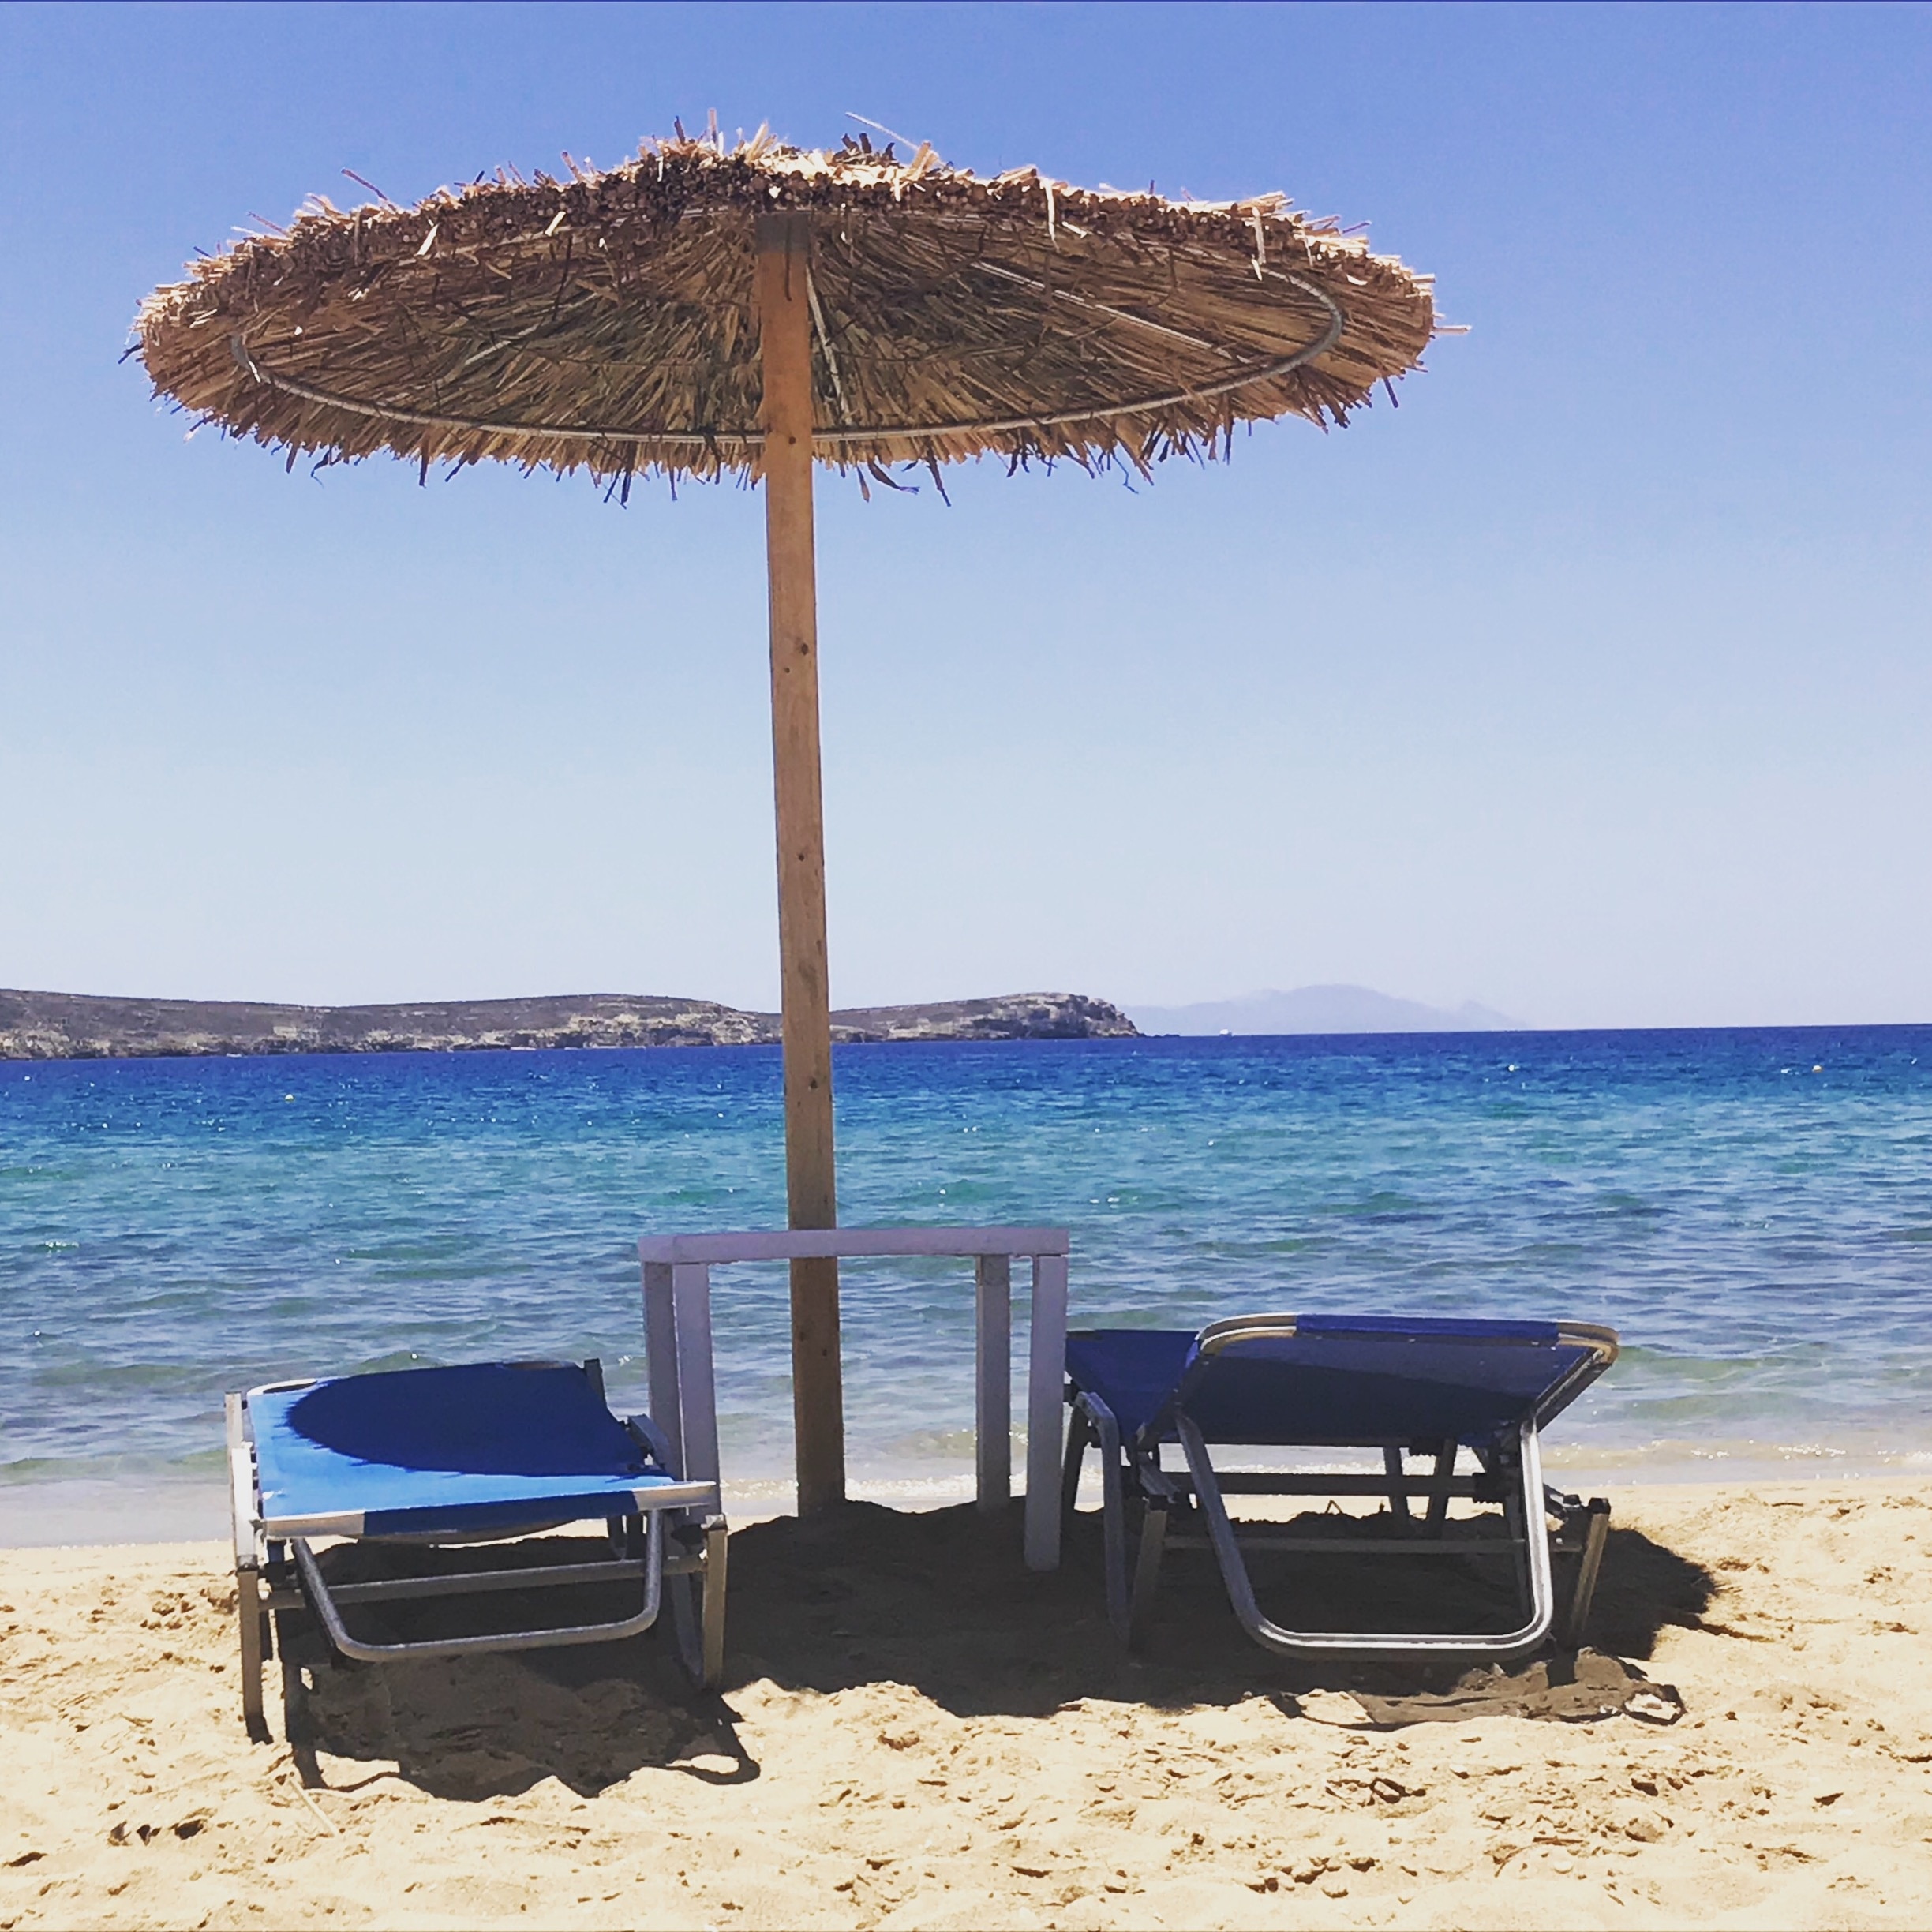 Golden Beach on the island of Paros, Greece. Big, long stretch of Beach with soft golden sand. There are big rocks in the ocean so be careful when you walk in. Water is clear so you can see down to the ocean floor. #paros #greece #beach #goldenbeach